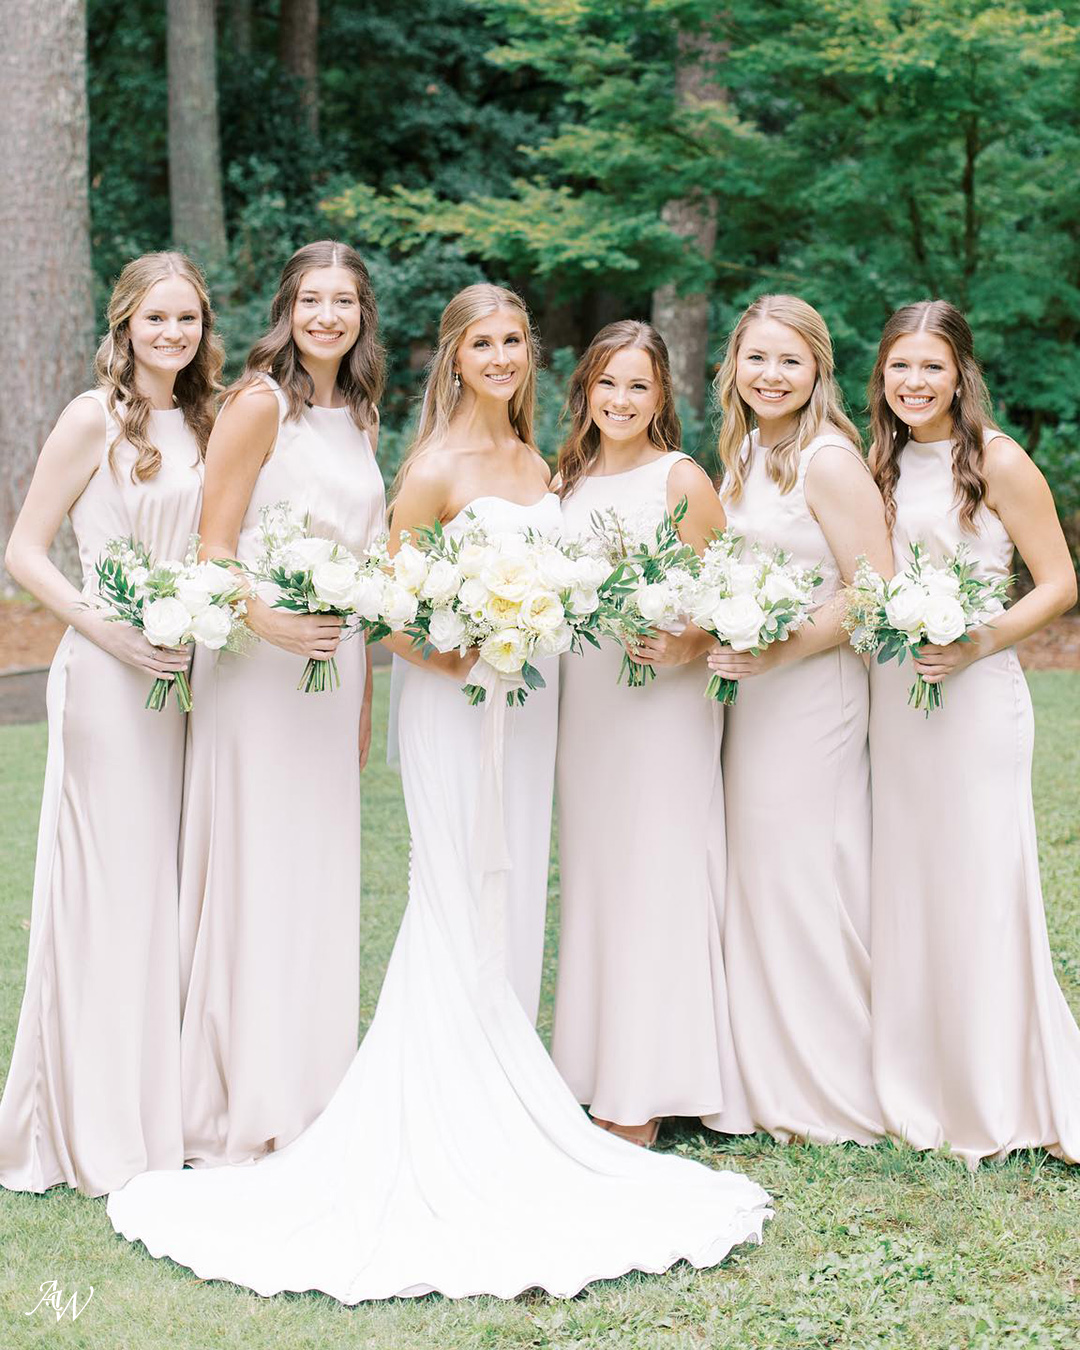 AW Bridal Dresses For Bride, Moms and Bridesmaids